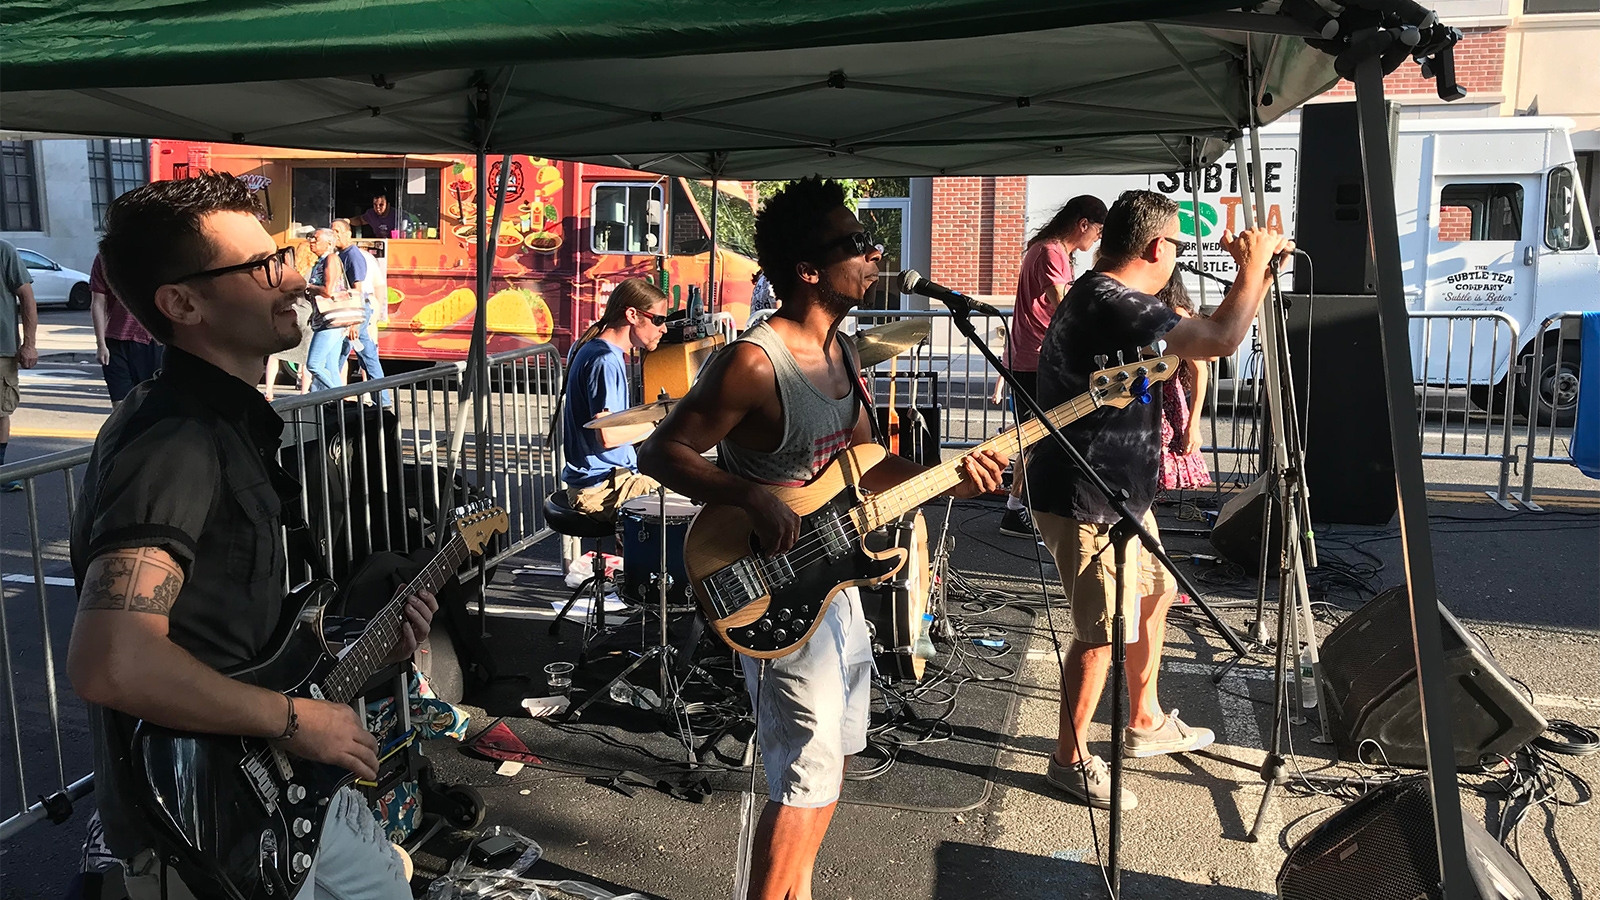 Alive on 25 street festival returns to Riverhead • The Long Island Times